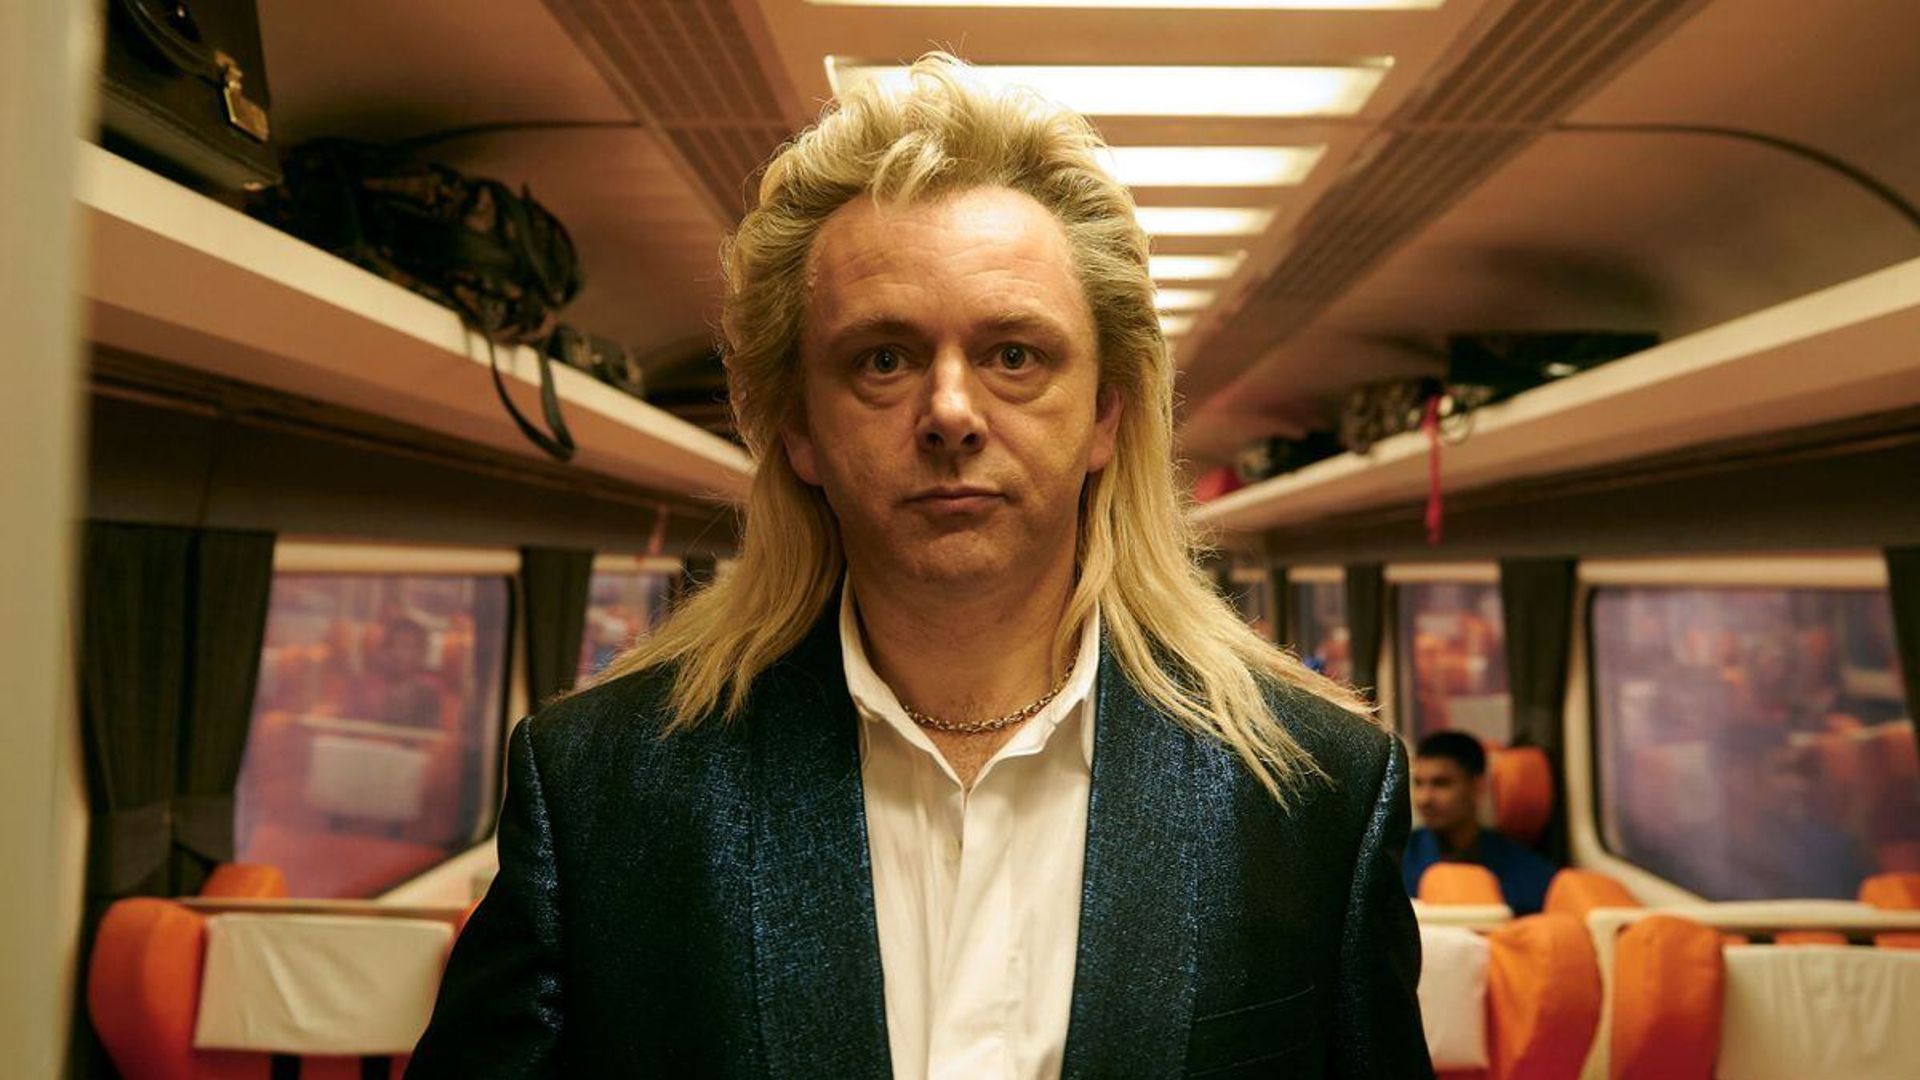 Michael Sheen in the film 'Last Train to Christmas'